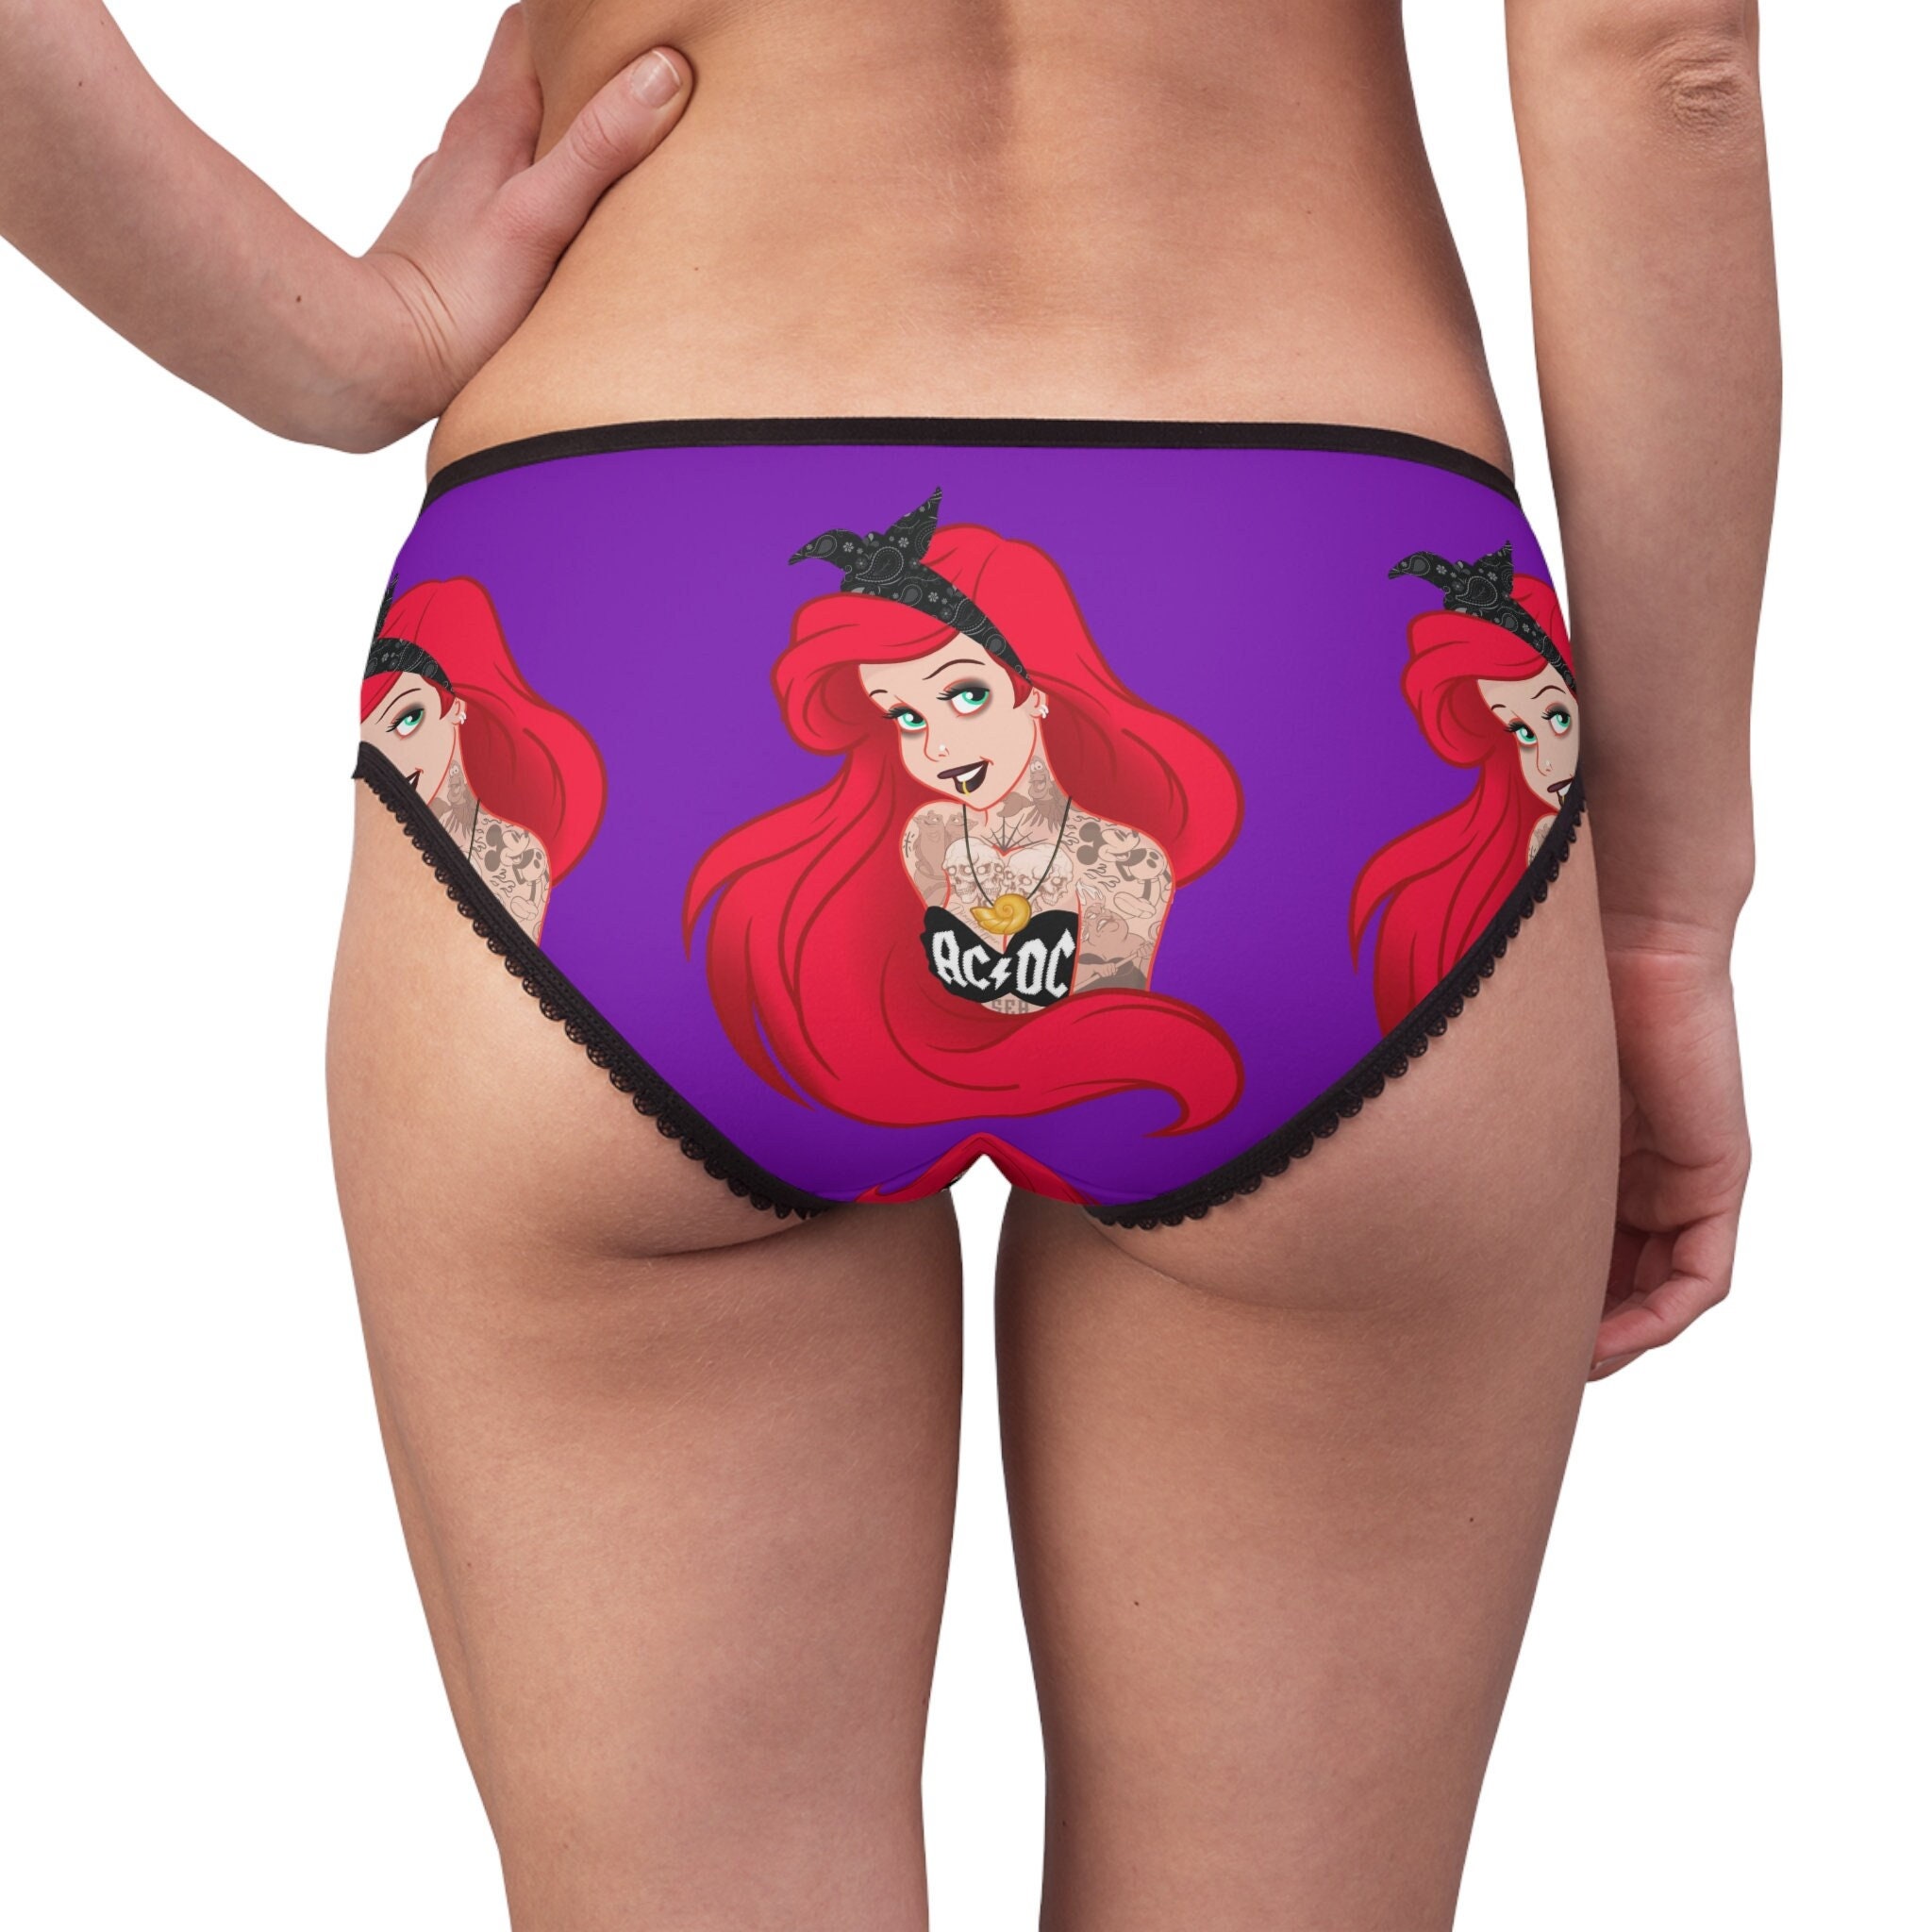 Sexy Panties, the Tightest Place on Earth Disney Inspired Panties